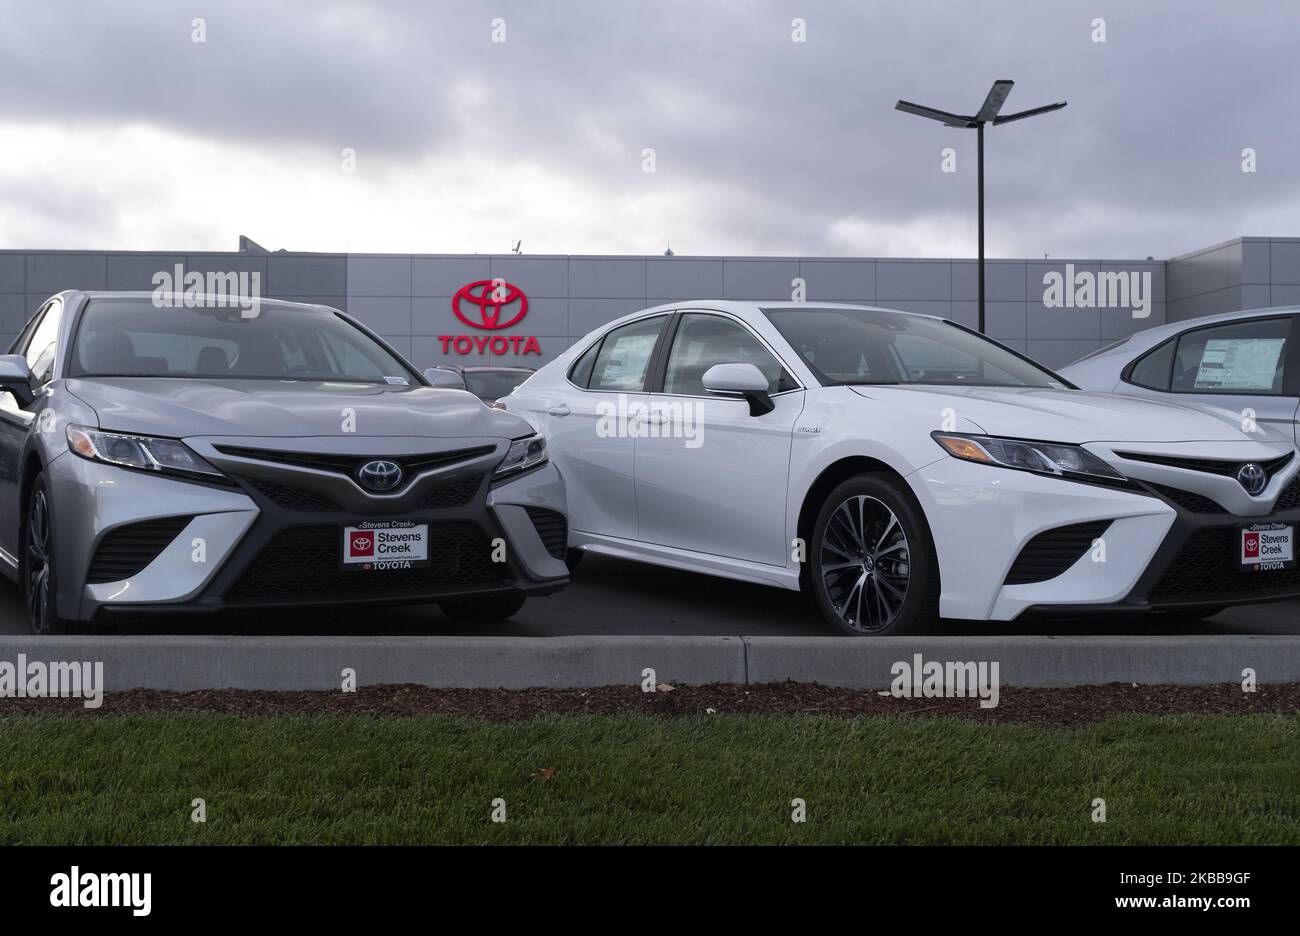 Toyota Camry cars are seen at a car dealership in San Jose, California, United States on Tuesday, November 19, 2019. Toyota has supported President Donald Trump's plan to bar California from setting its own vehicle emissions rules. California governor Gavin Newsom said on Monday it will halt all purchases of new vehicles for state government fleets from GM, Toyota and Fiat Chrysler. (Photo by Yichuan Cao/NurPhoto) Stock Photo